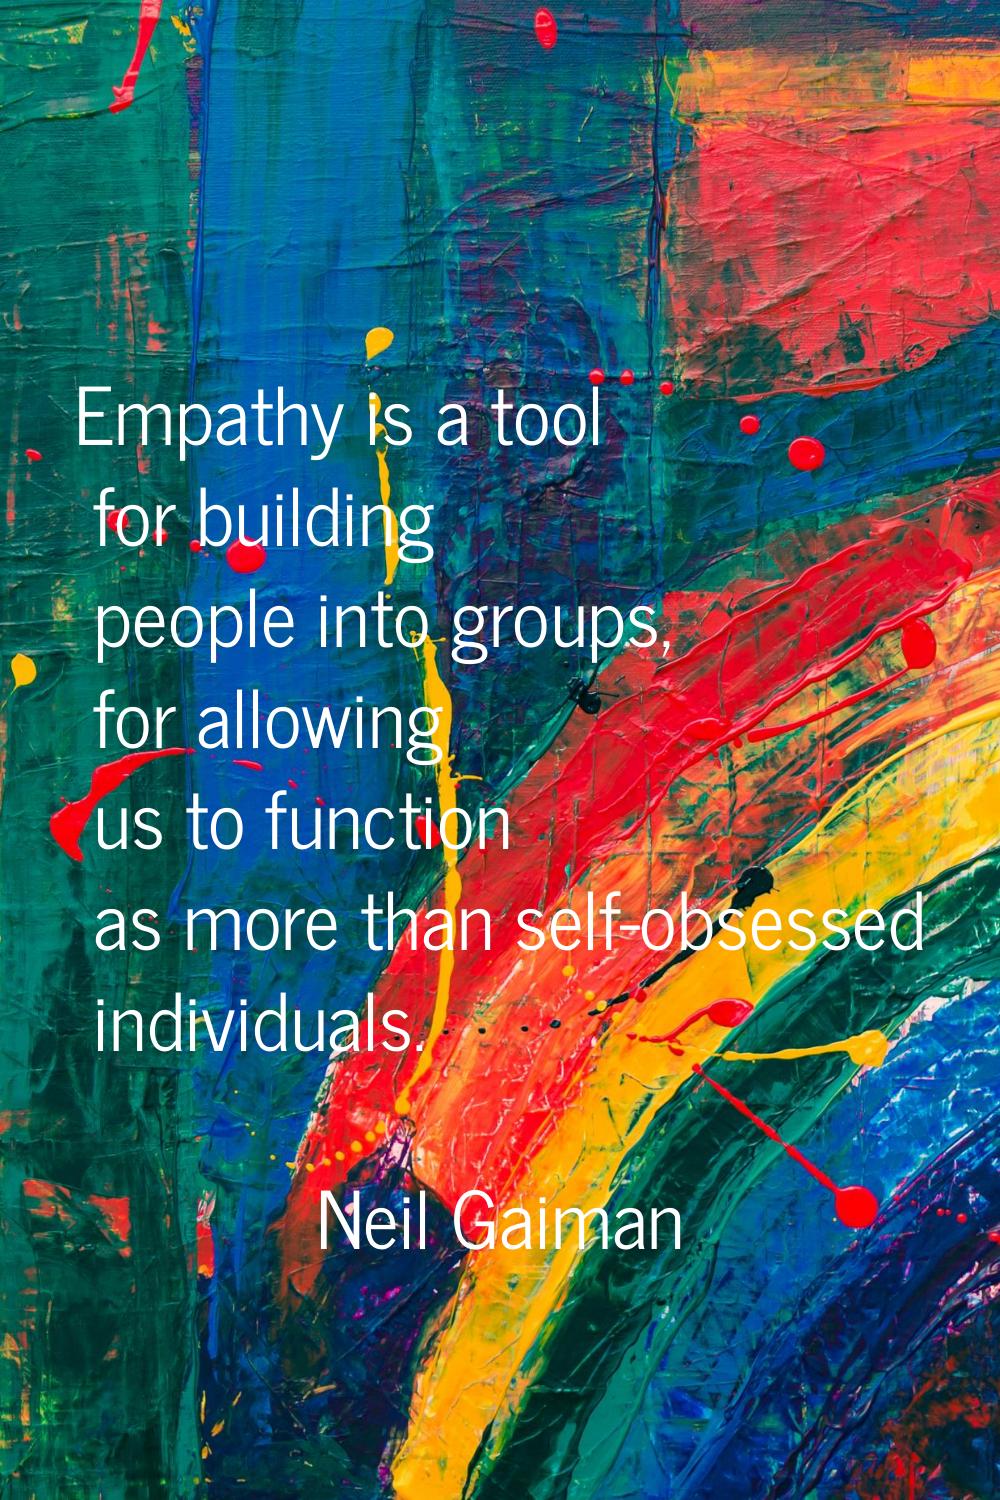 Empathy is a tool for building people into groups, for allowing us to function as more than self-ob